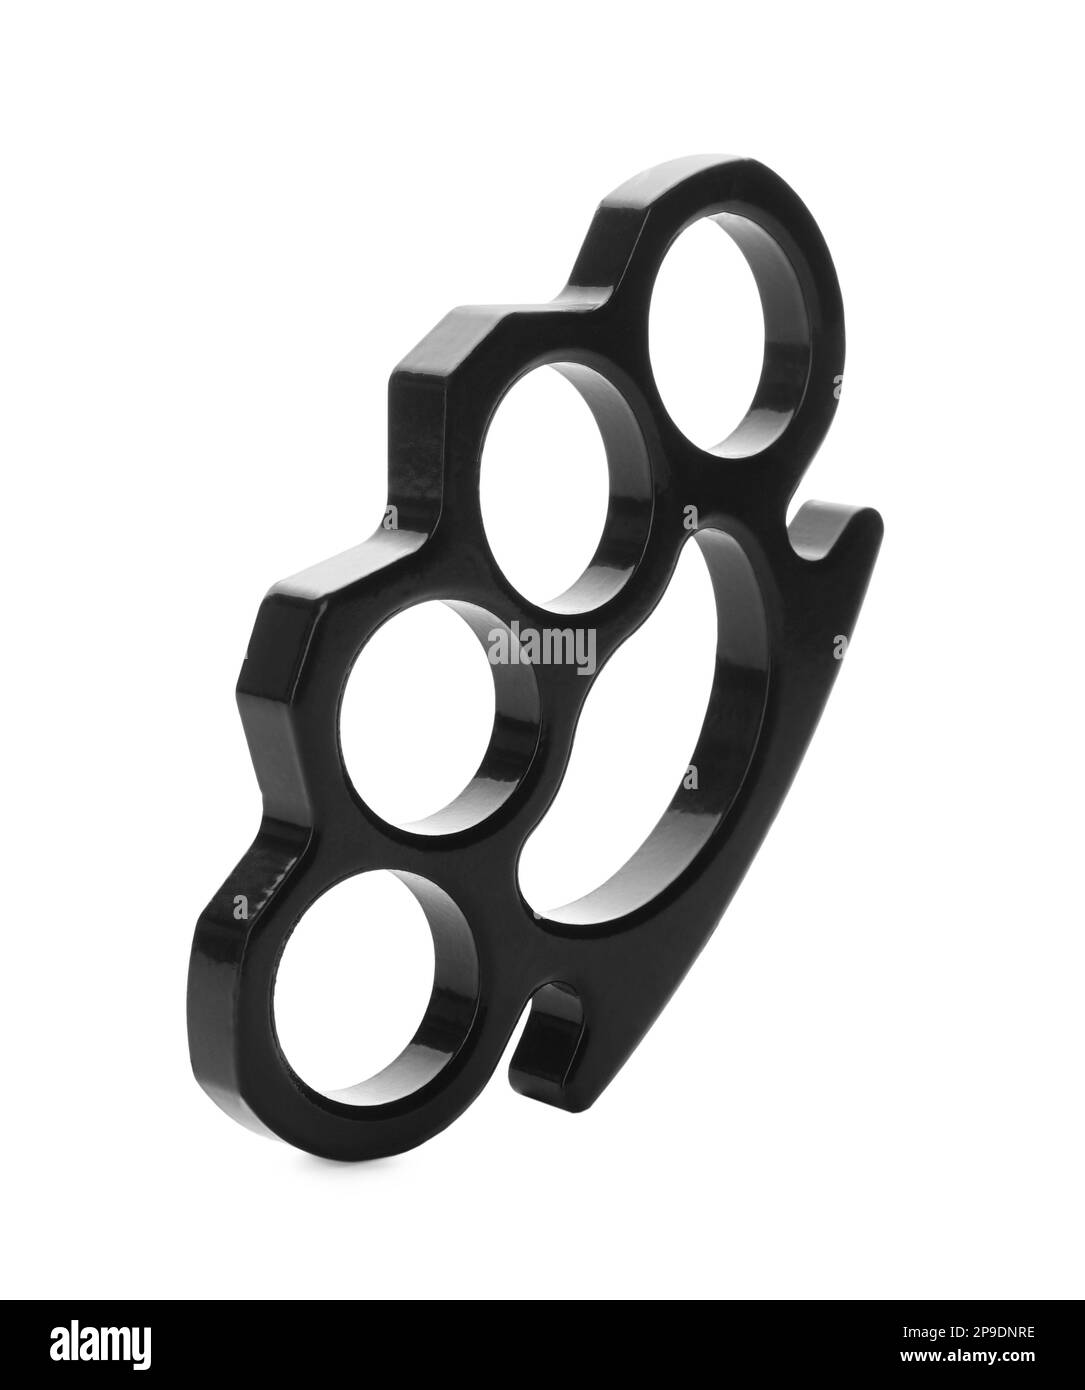 Black Brass Knuckles on Wooden Background, Top View Stock Photo - Image of  ring, punch: 236439042